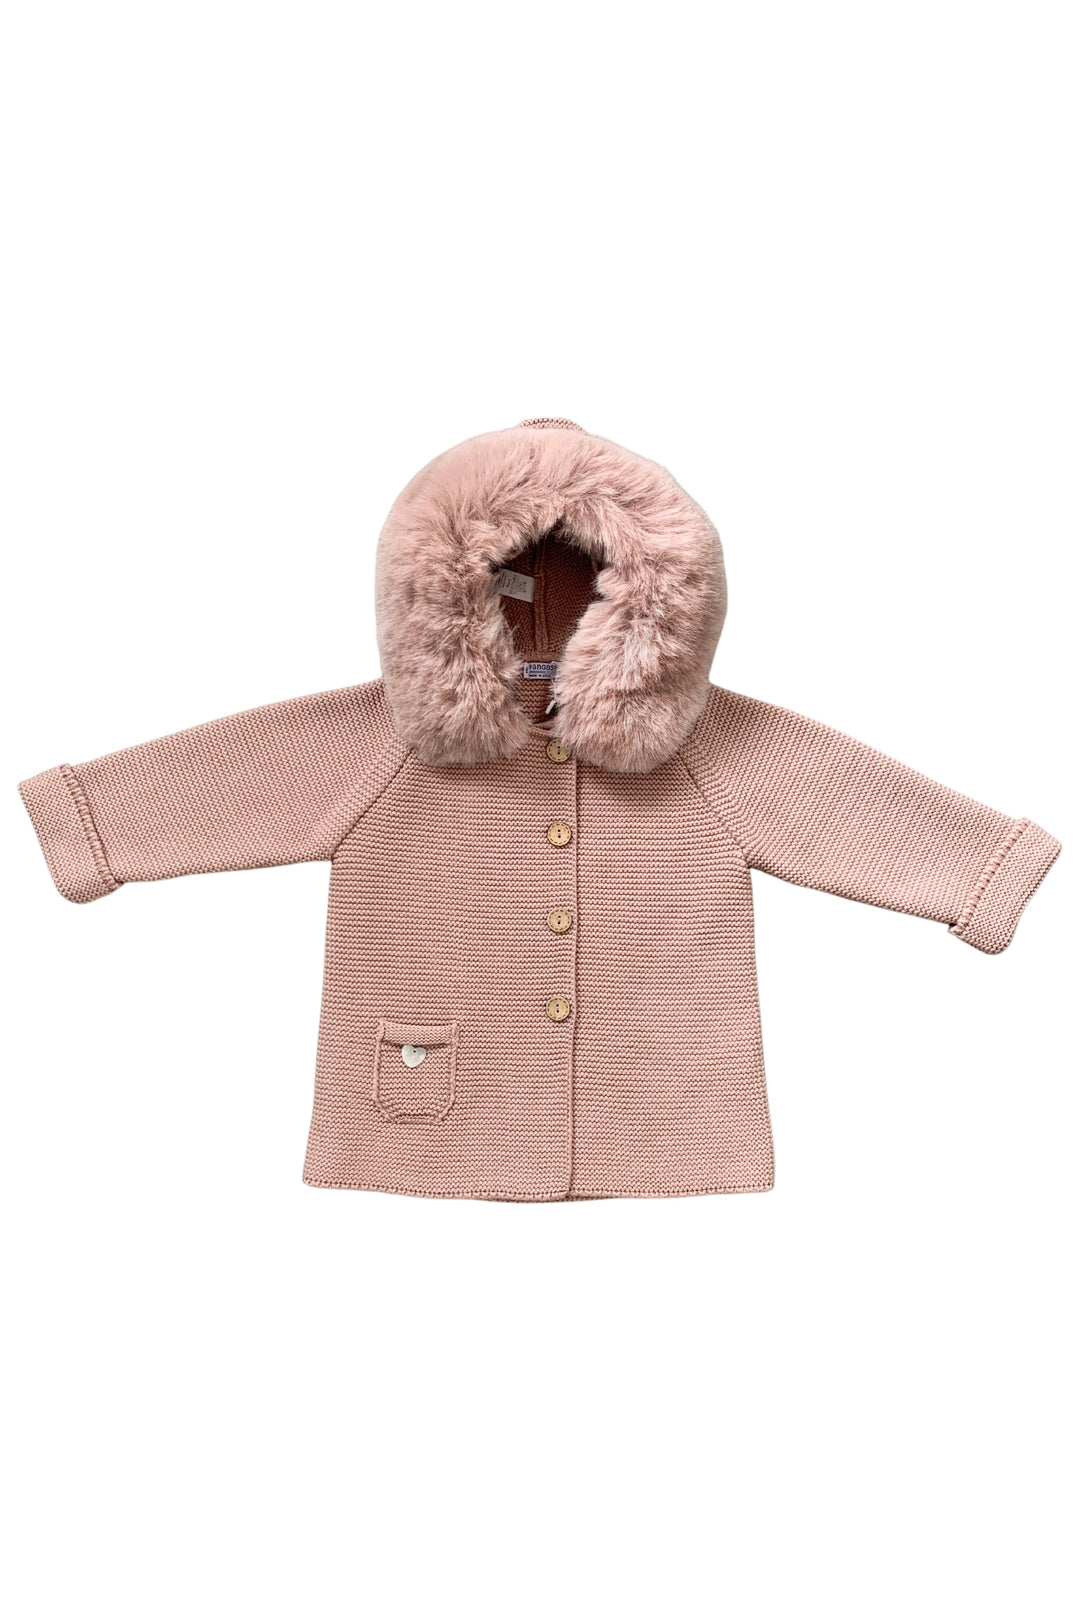 Pangasa PREORDER Vintage Pink Faux Fur Knitted Jacket | iphoneandroidapplications